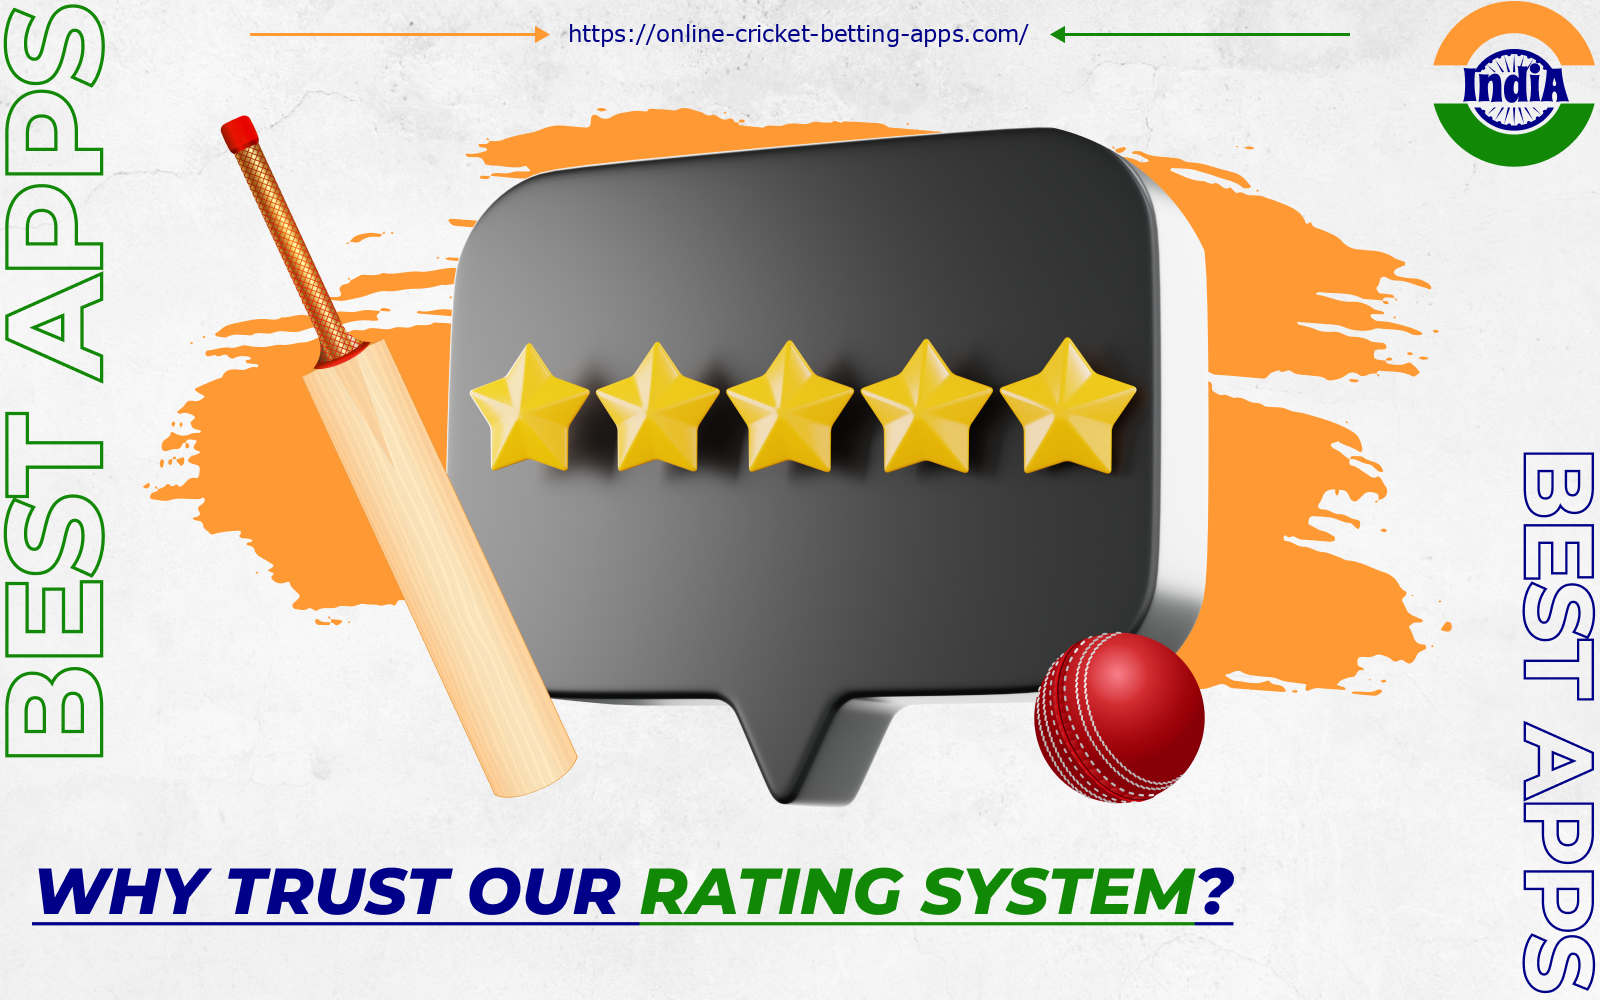 All cricket betting apps promise the highest odds, the most generous bonuses and the best user experience, so having an unbiased rating will help Indian bettors a lot